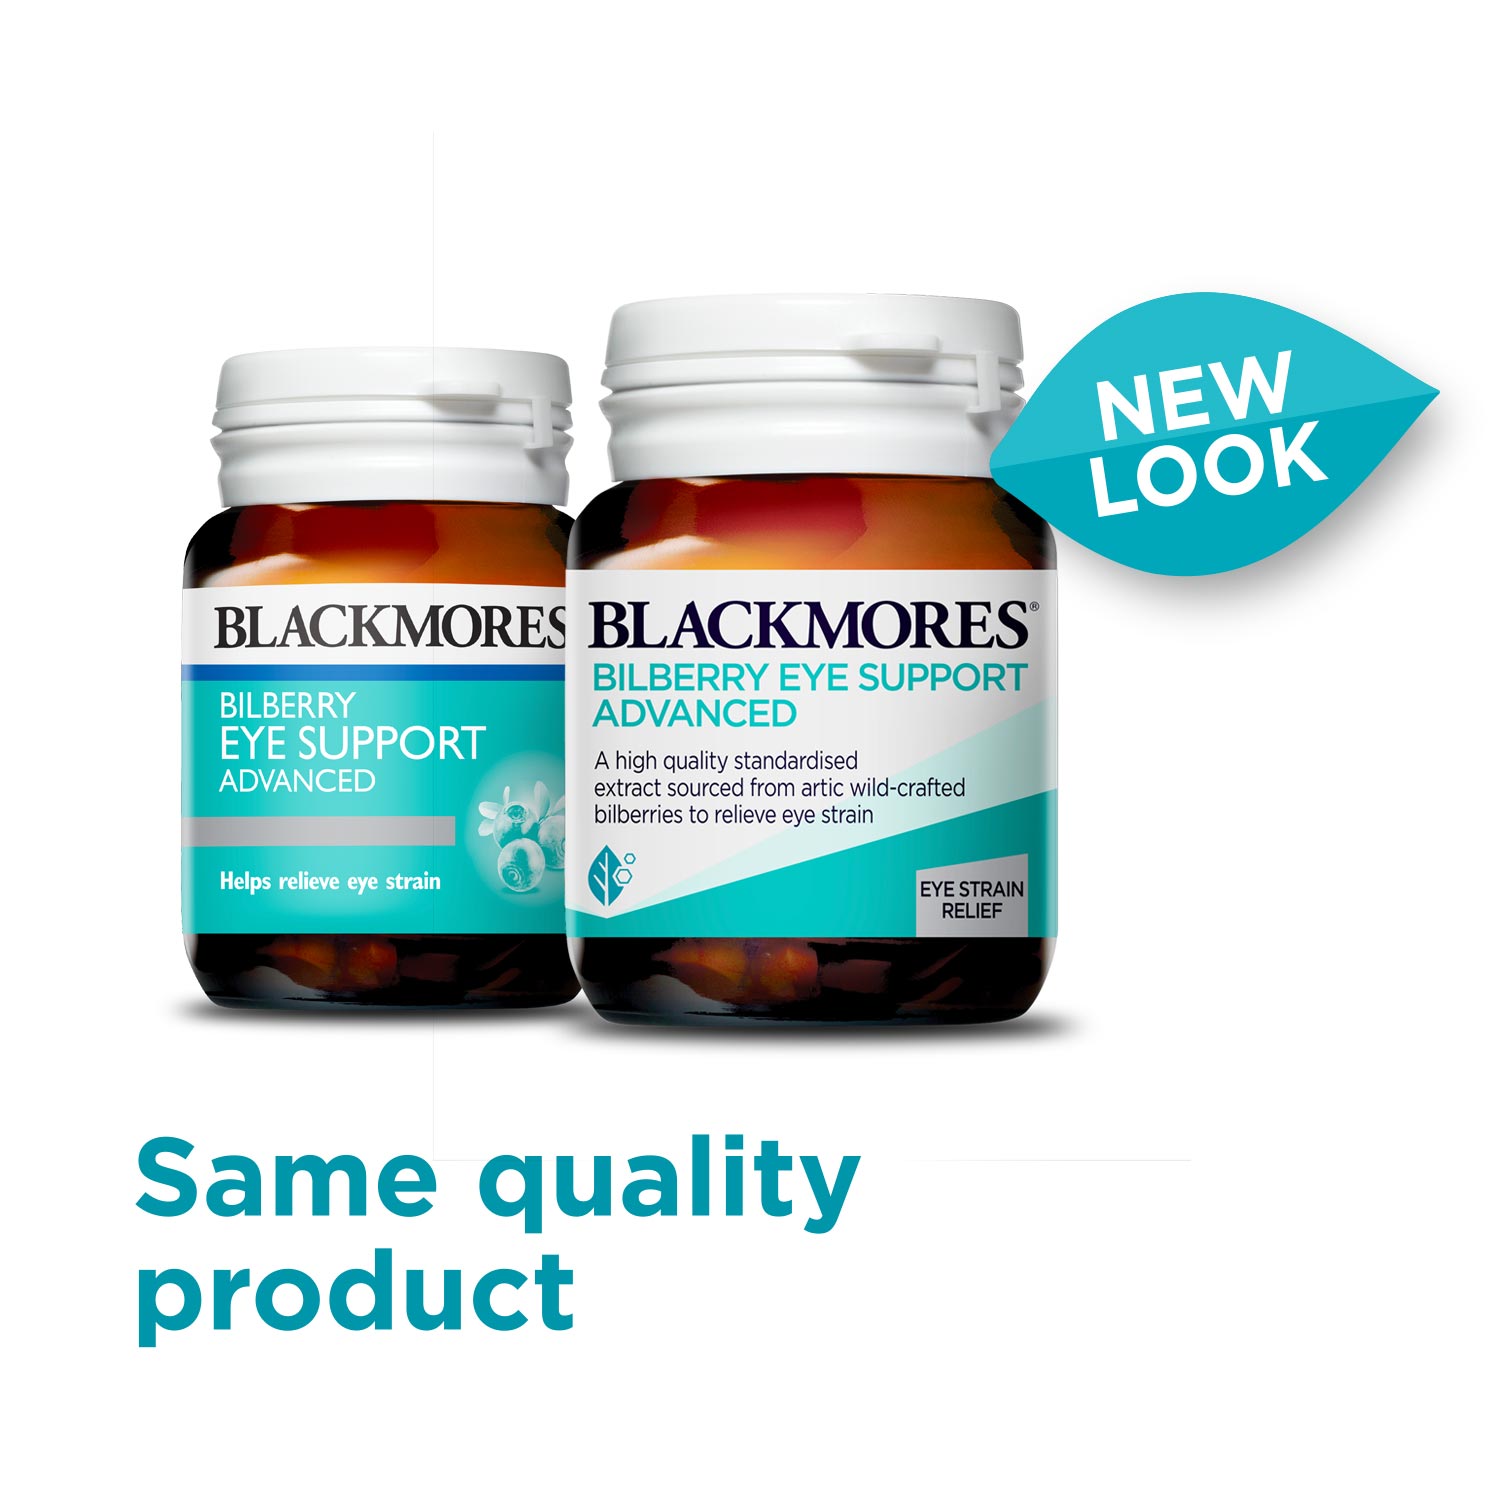 Blackmores Bilberry Eye Support Advanced new look label